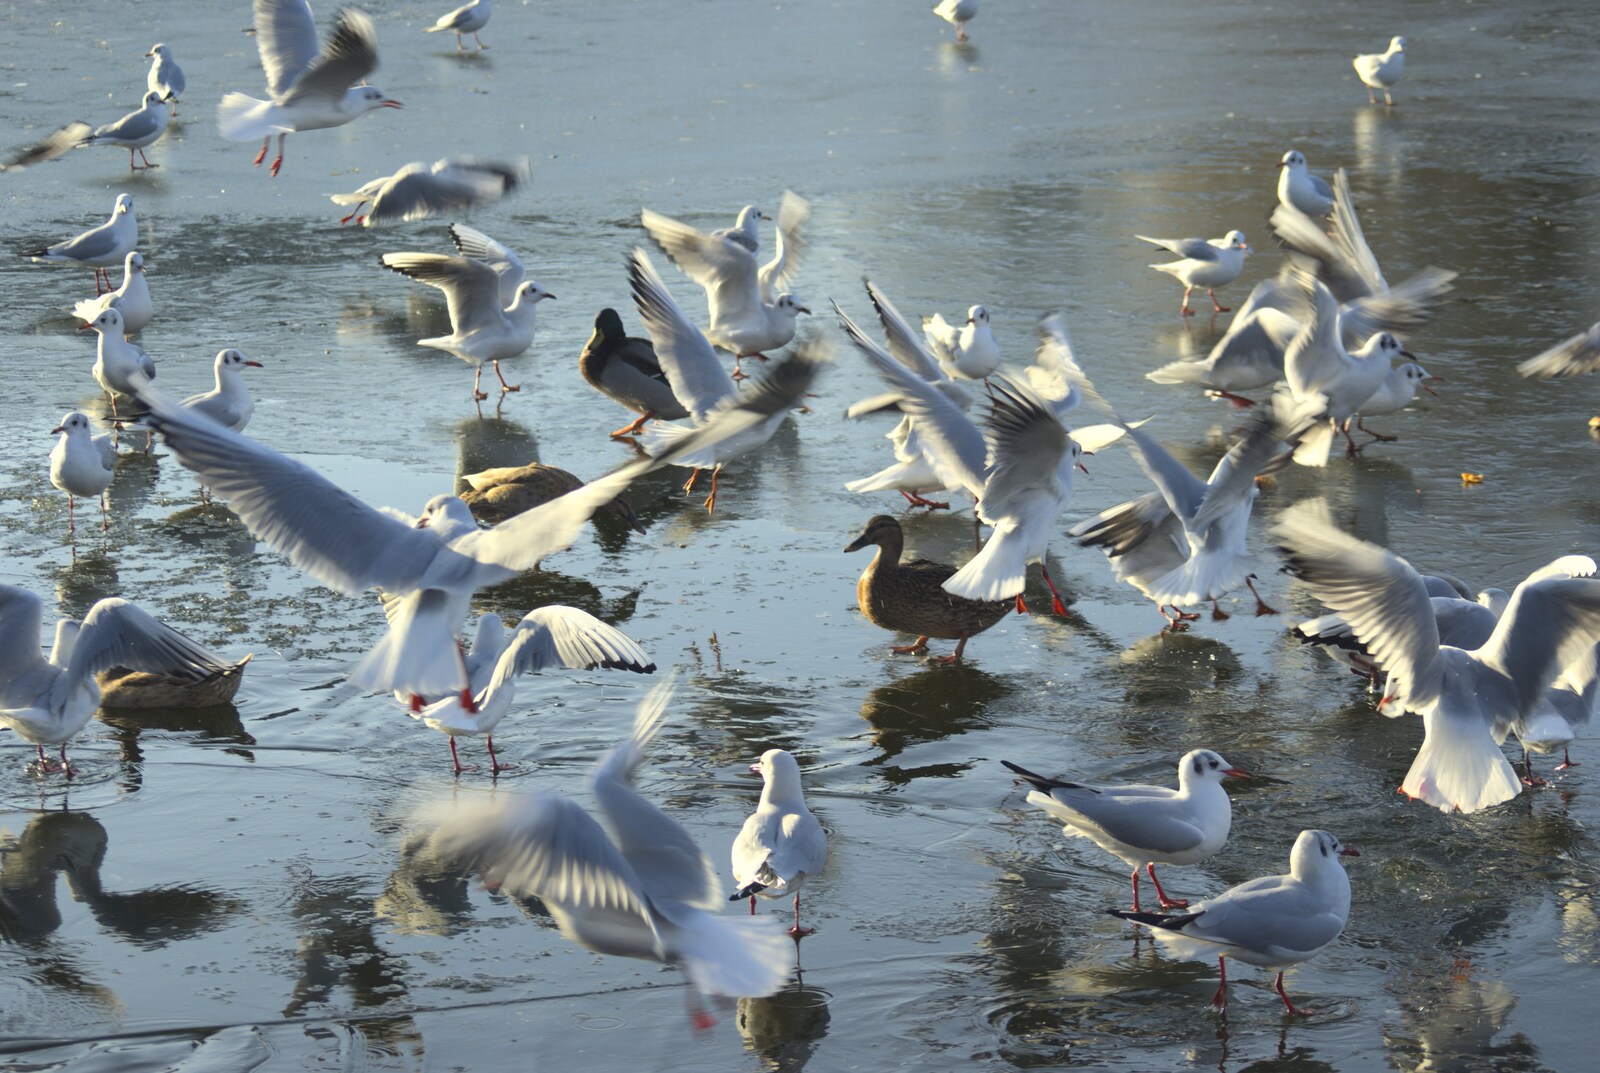 A Snowy Miscellany, Diss, Norfolk - 9th January 2010: There's an explosion of seagulls